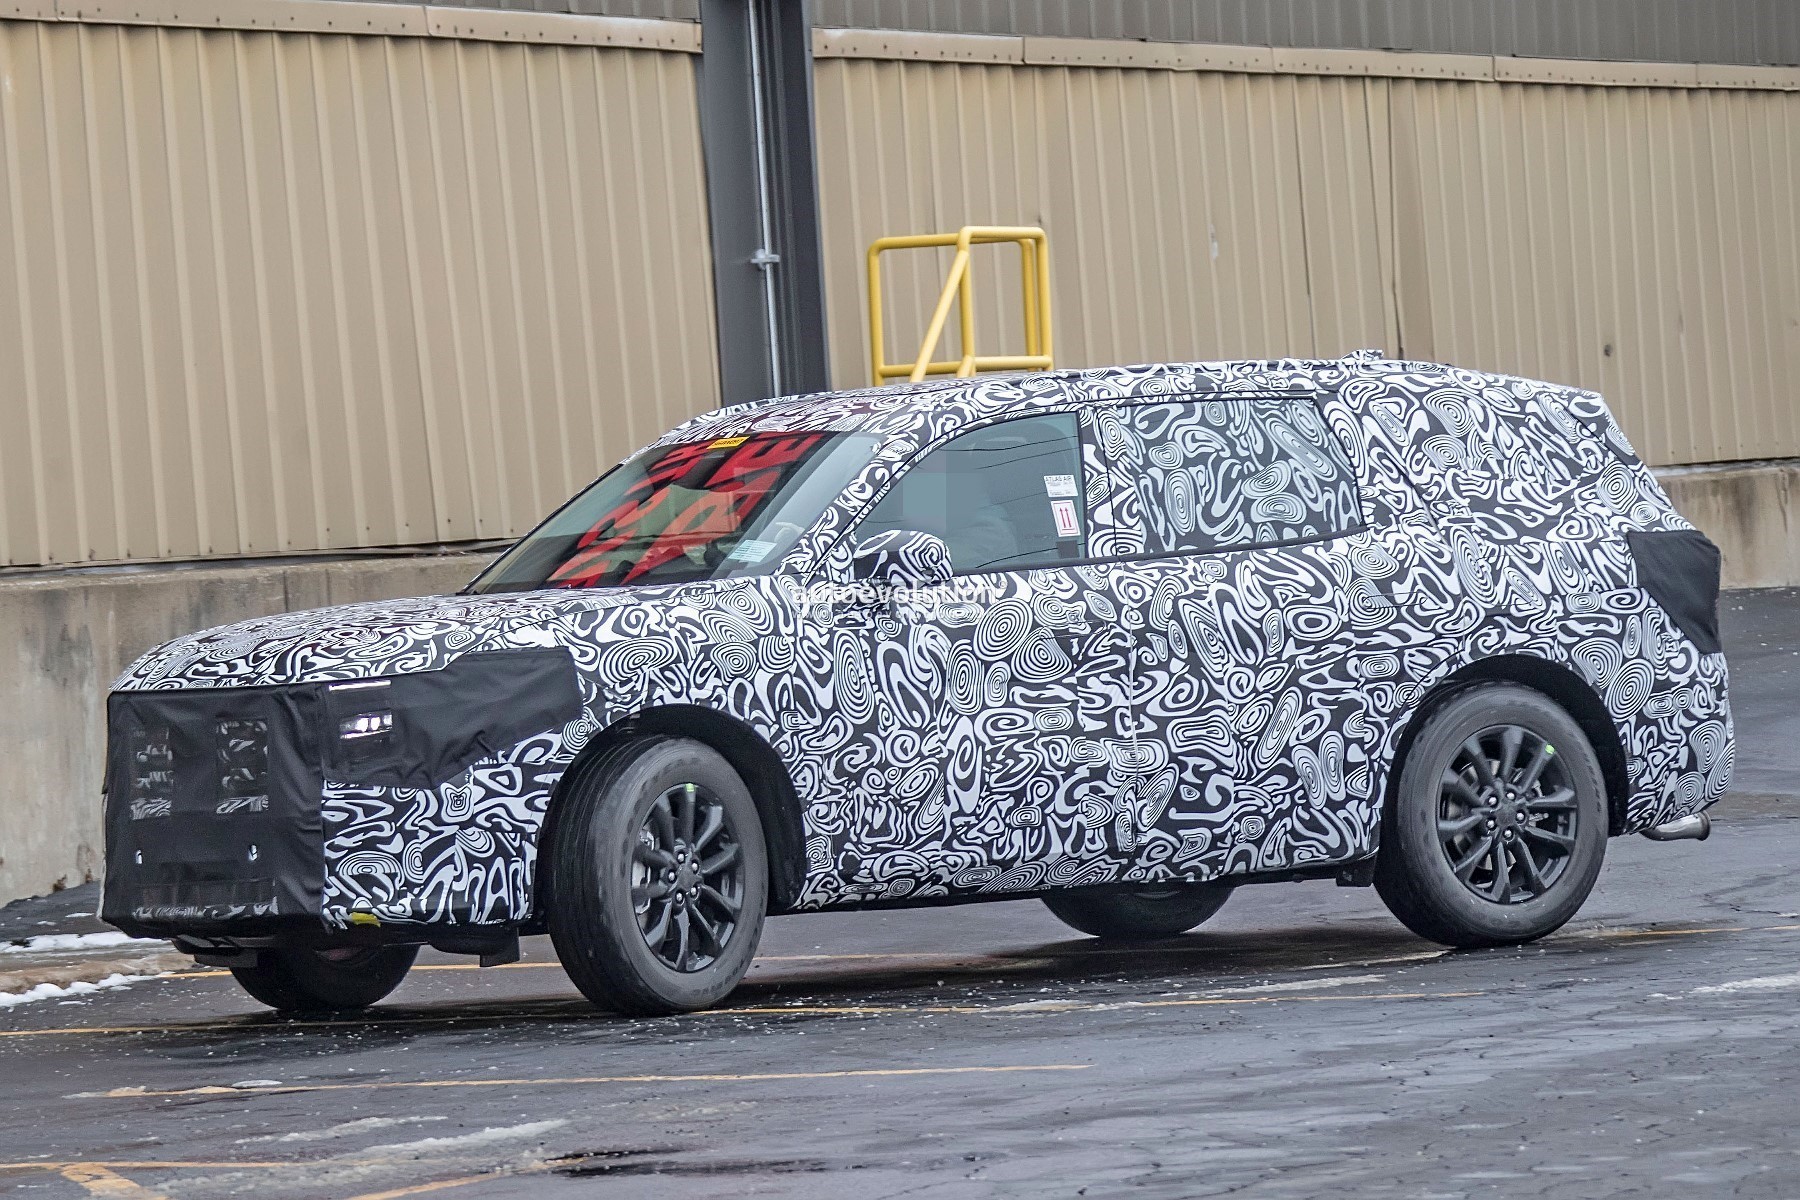 Ford Fusion Active 2023. New Ford Electric SUV Spied Testing ahead of 2023 Reveal.